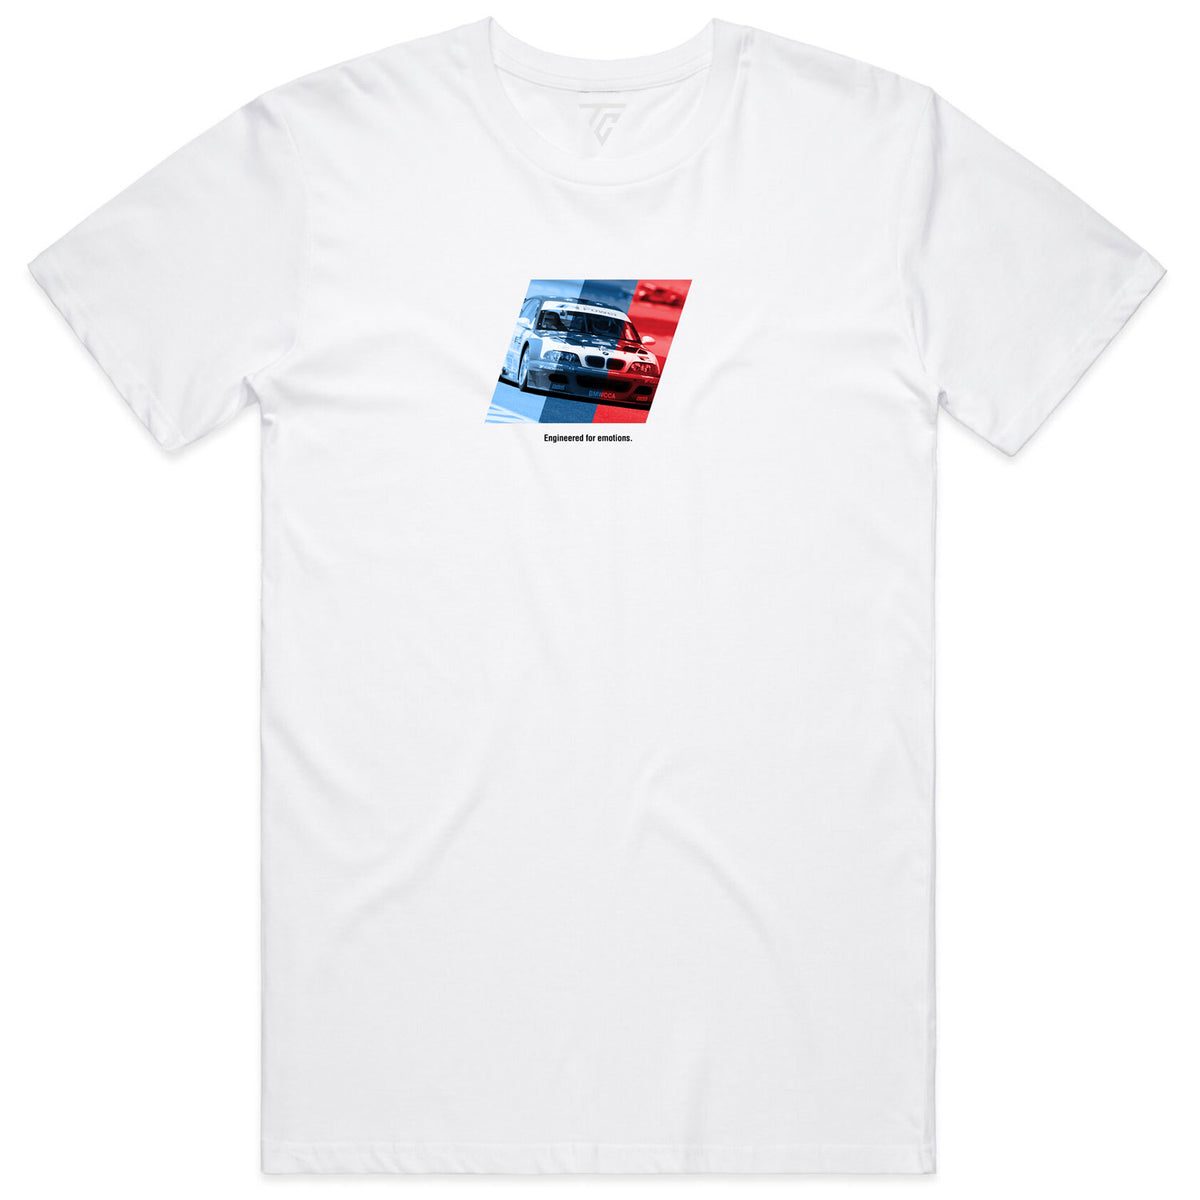 ENGINEERED FOR EMOTIONS TEE